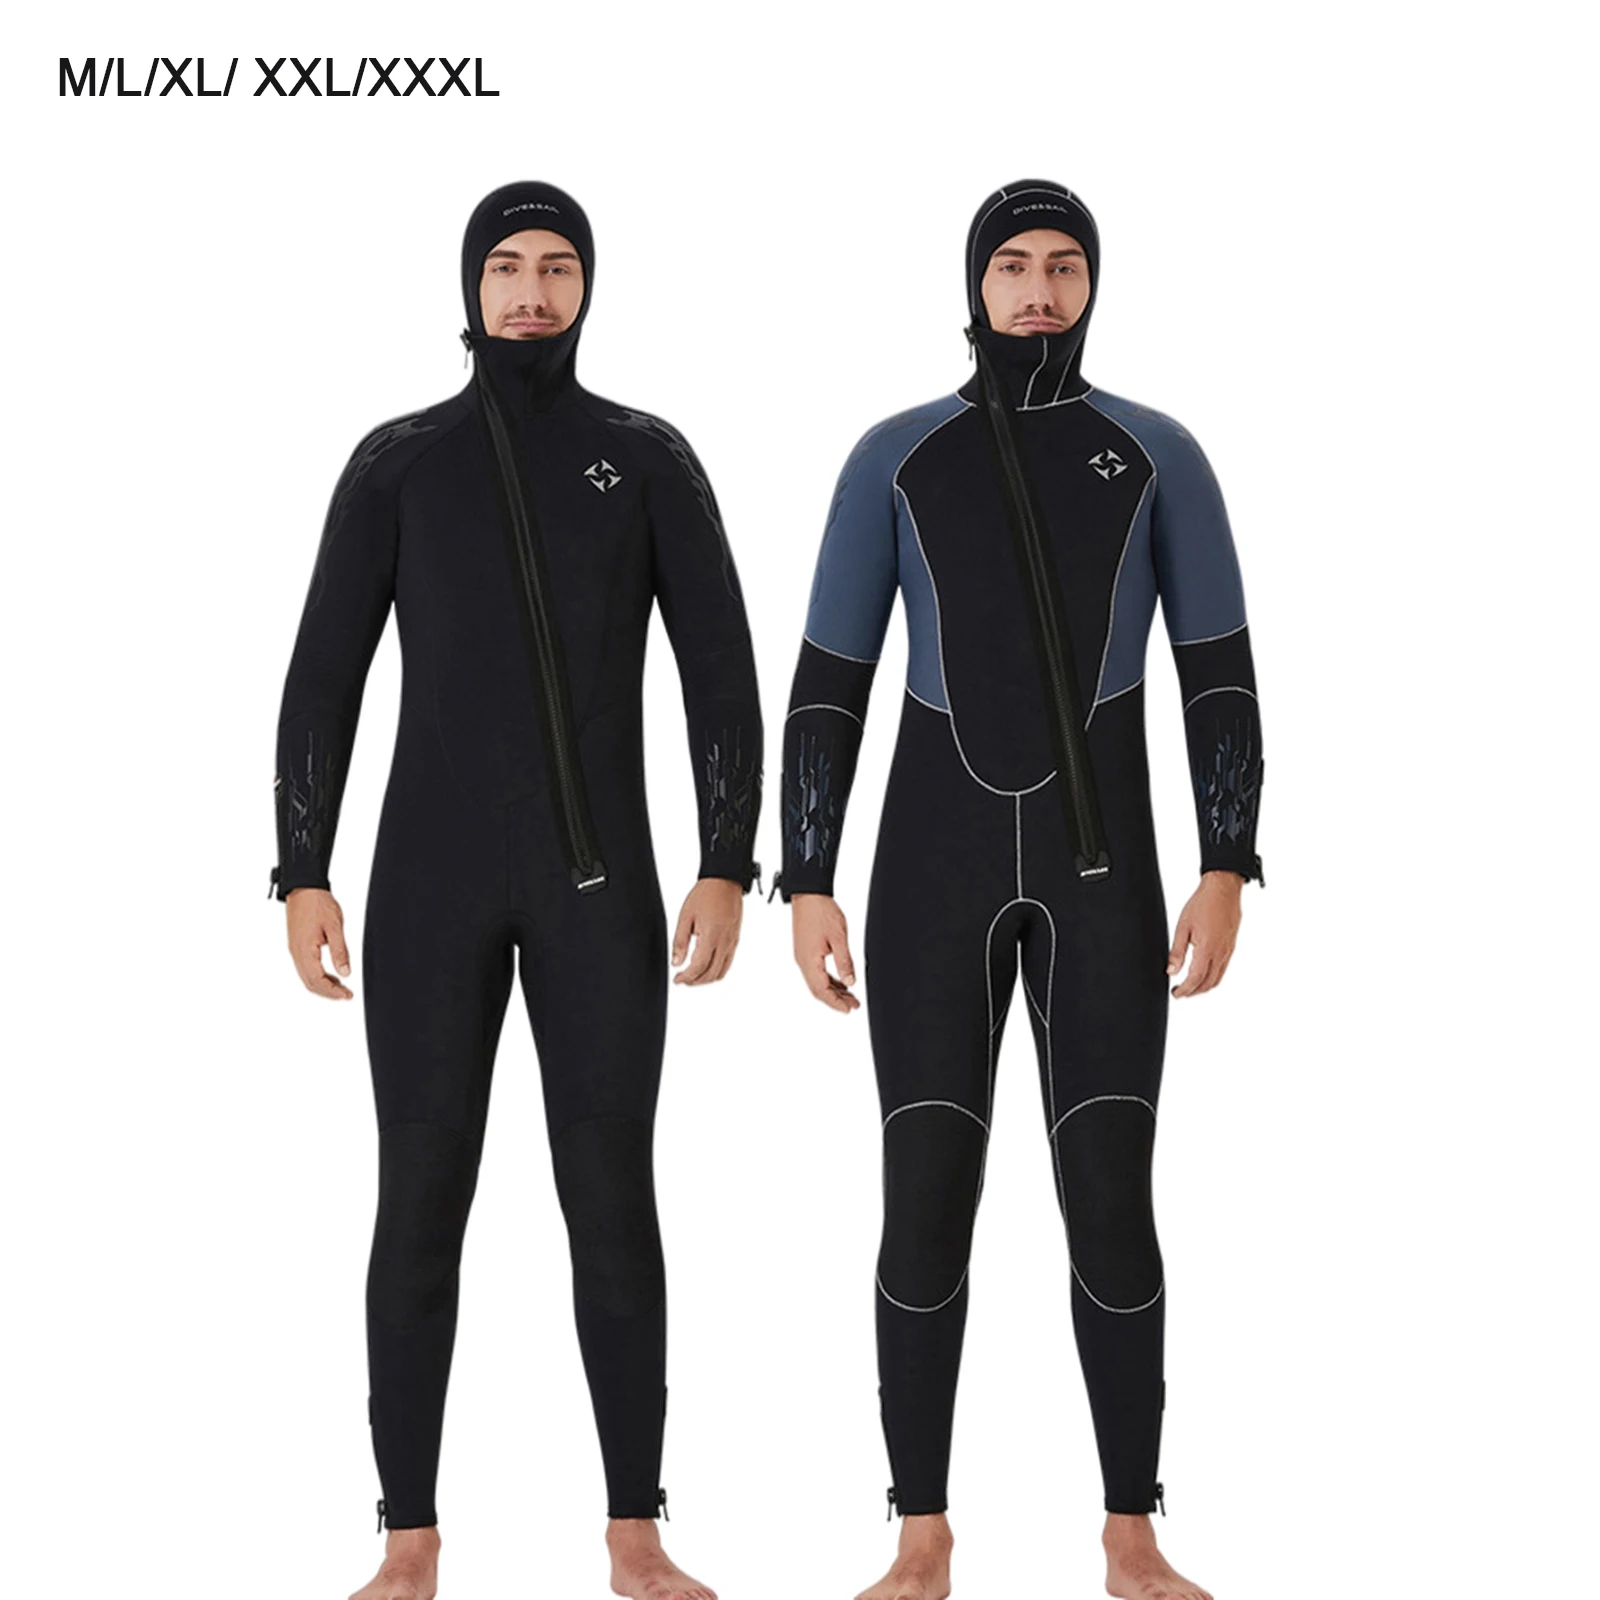 Snorkeling Neoprene Wetsuit Full Body Diving Suit Wetsuit Diving Surfing Swimming Deep Dive Wet Suit for Under Water Sports